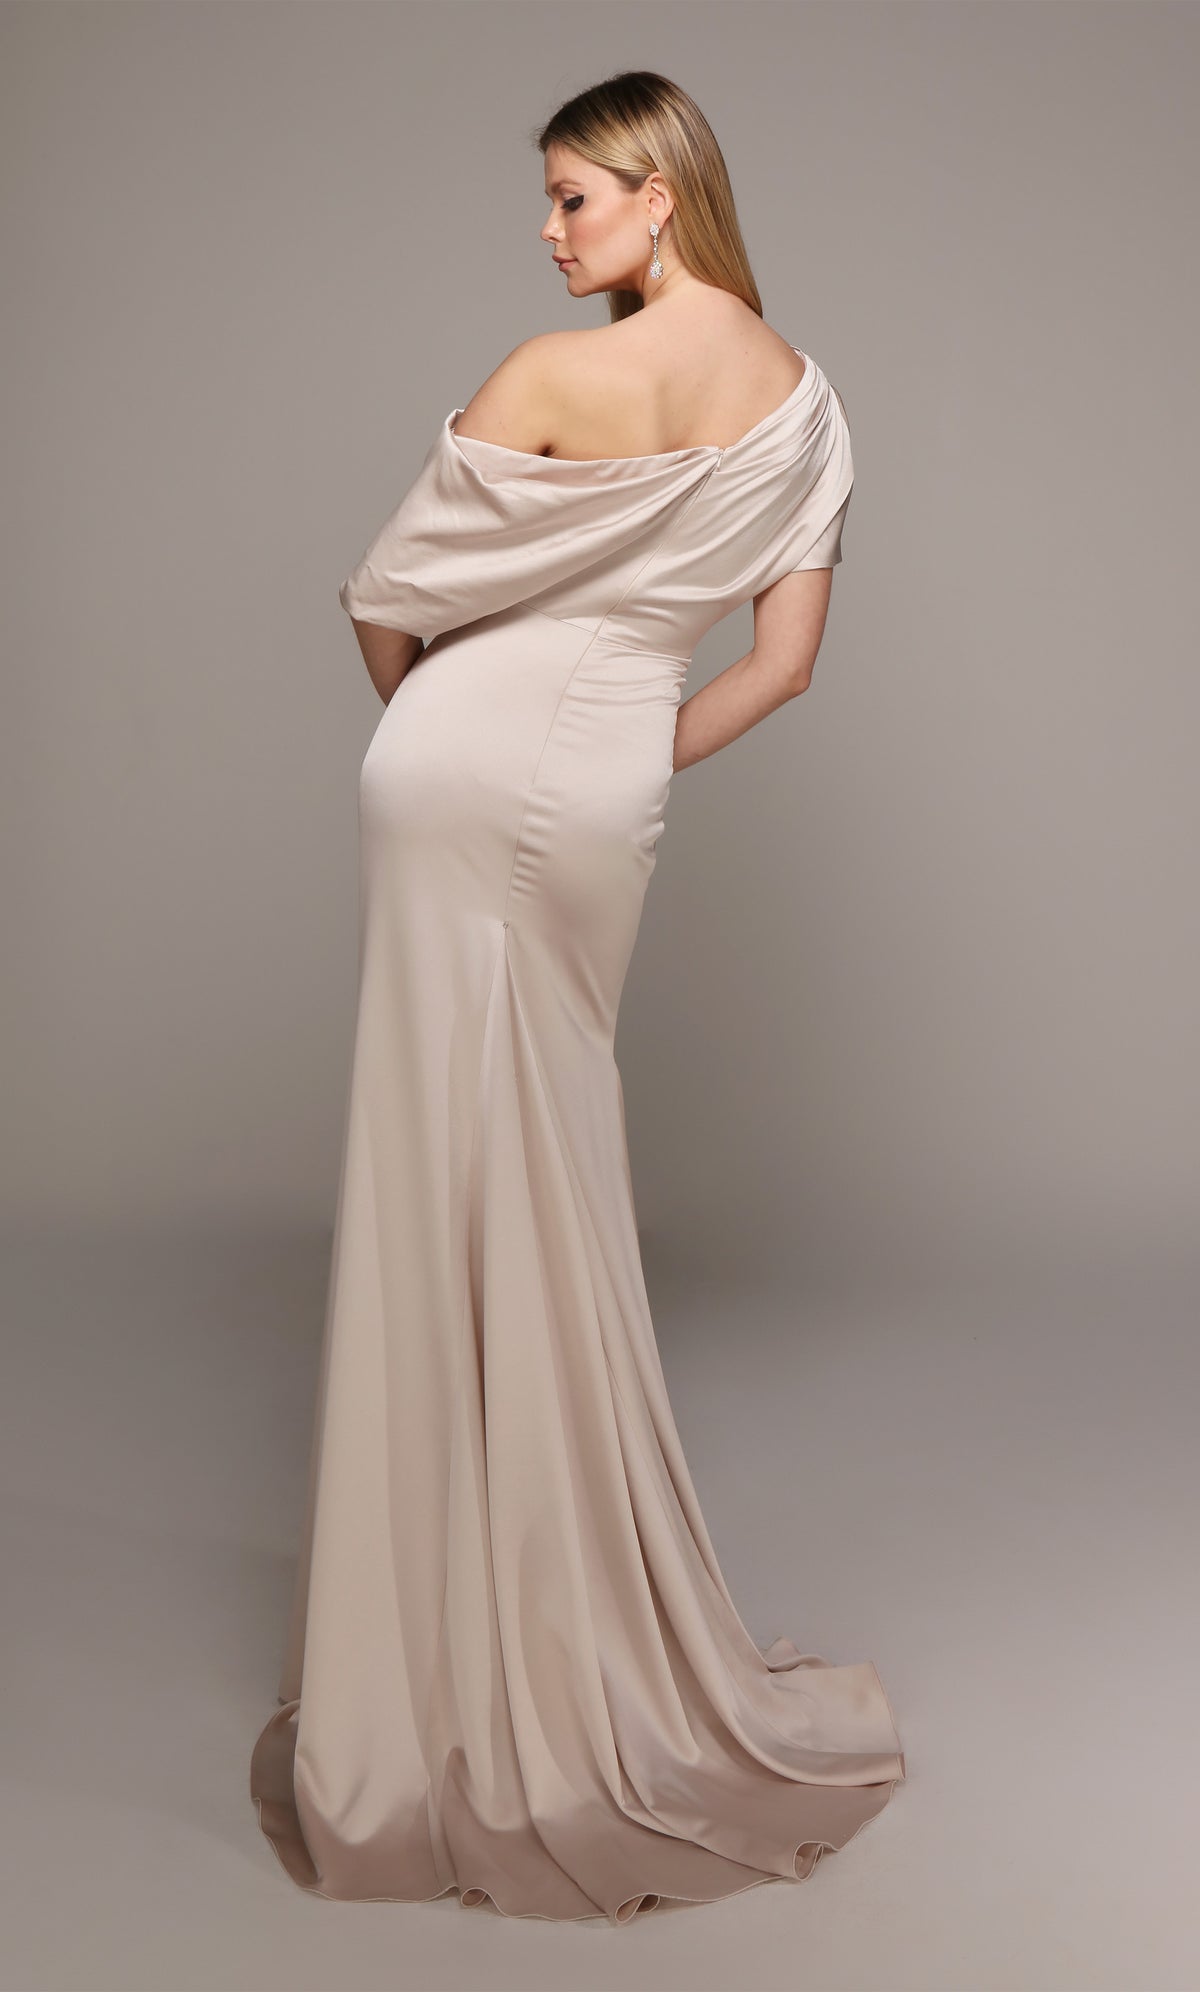 One shoulder drape dress with a closed back and train in creme color.